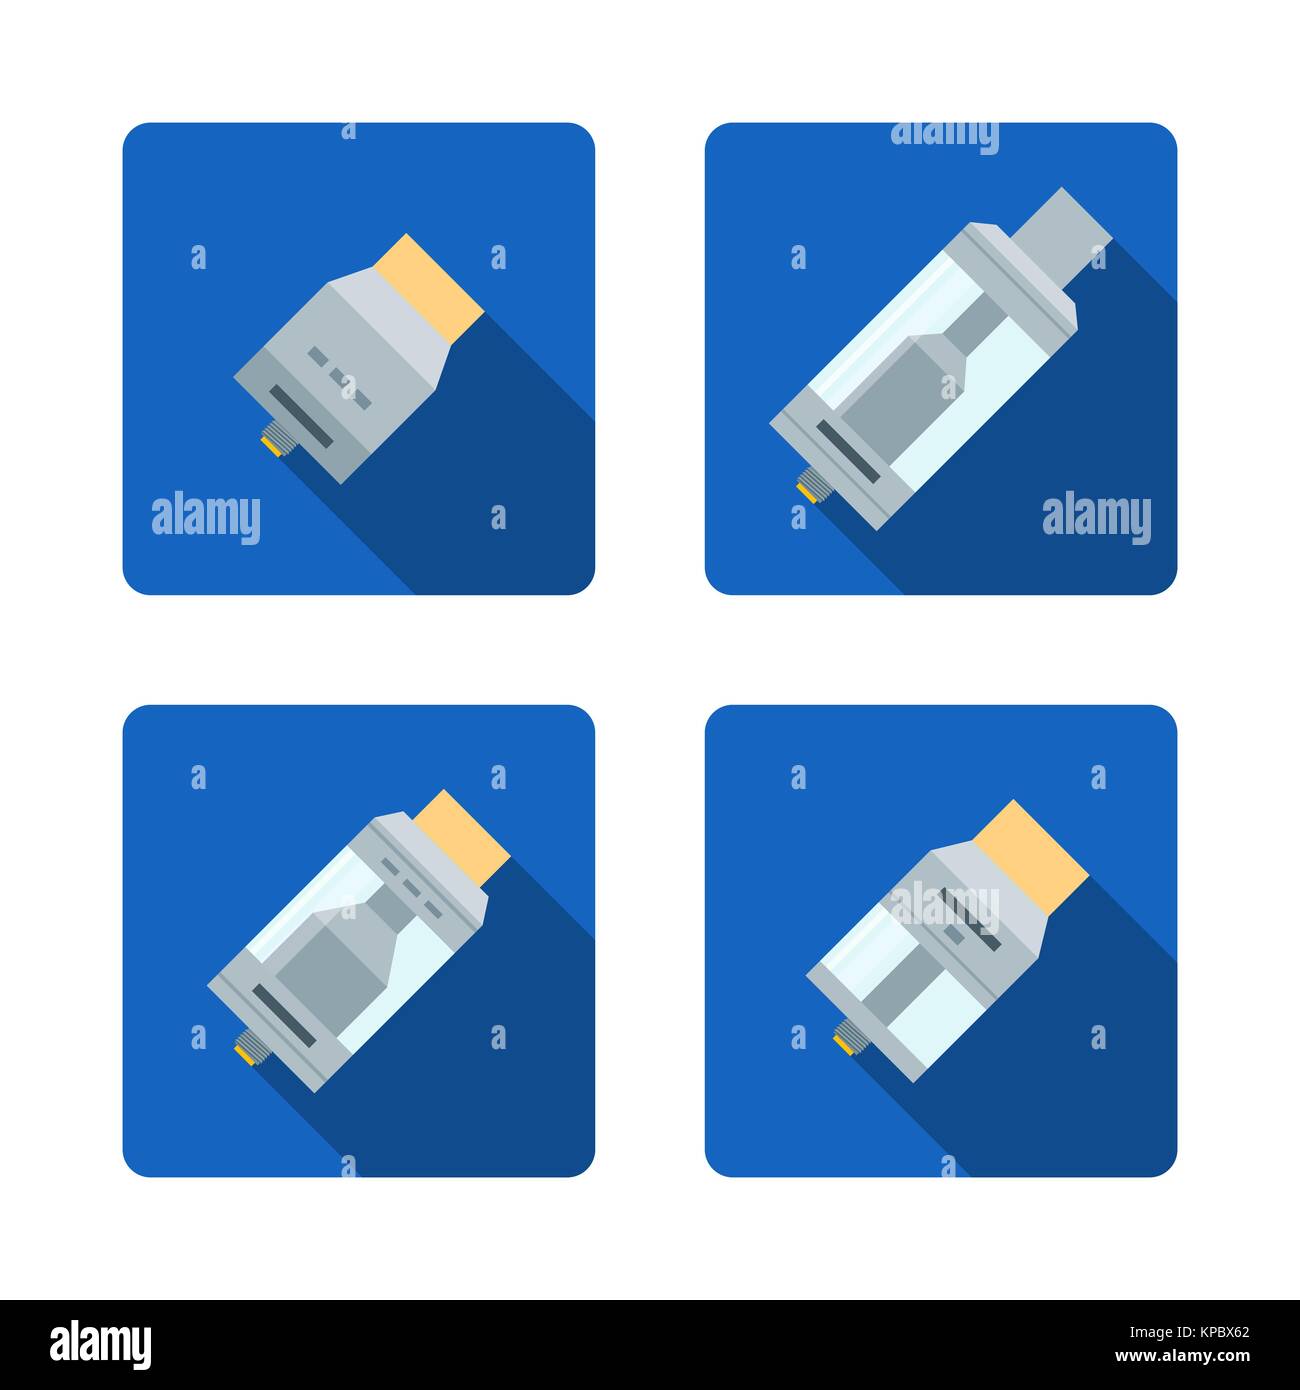 vector colorful flat design illustrations various rebuildable drip and tank vape atomizers types RDA RDTA RBA RTA long shadow square blue icons isolat Stock Vector